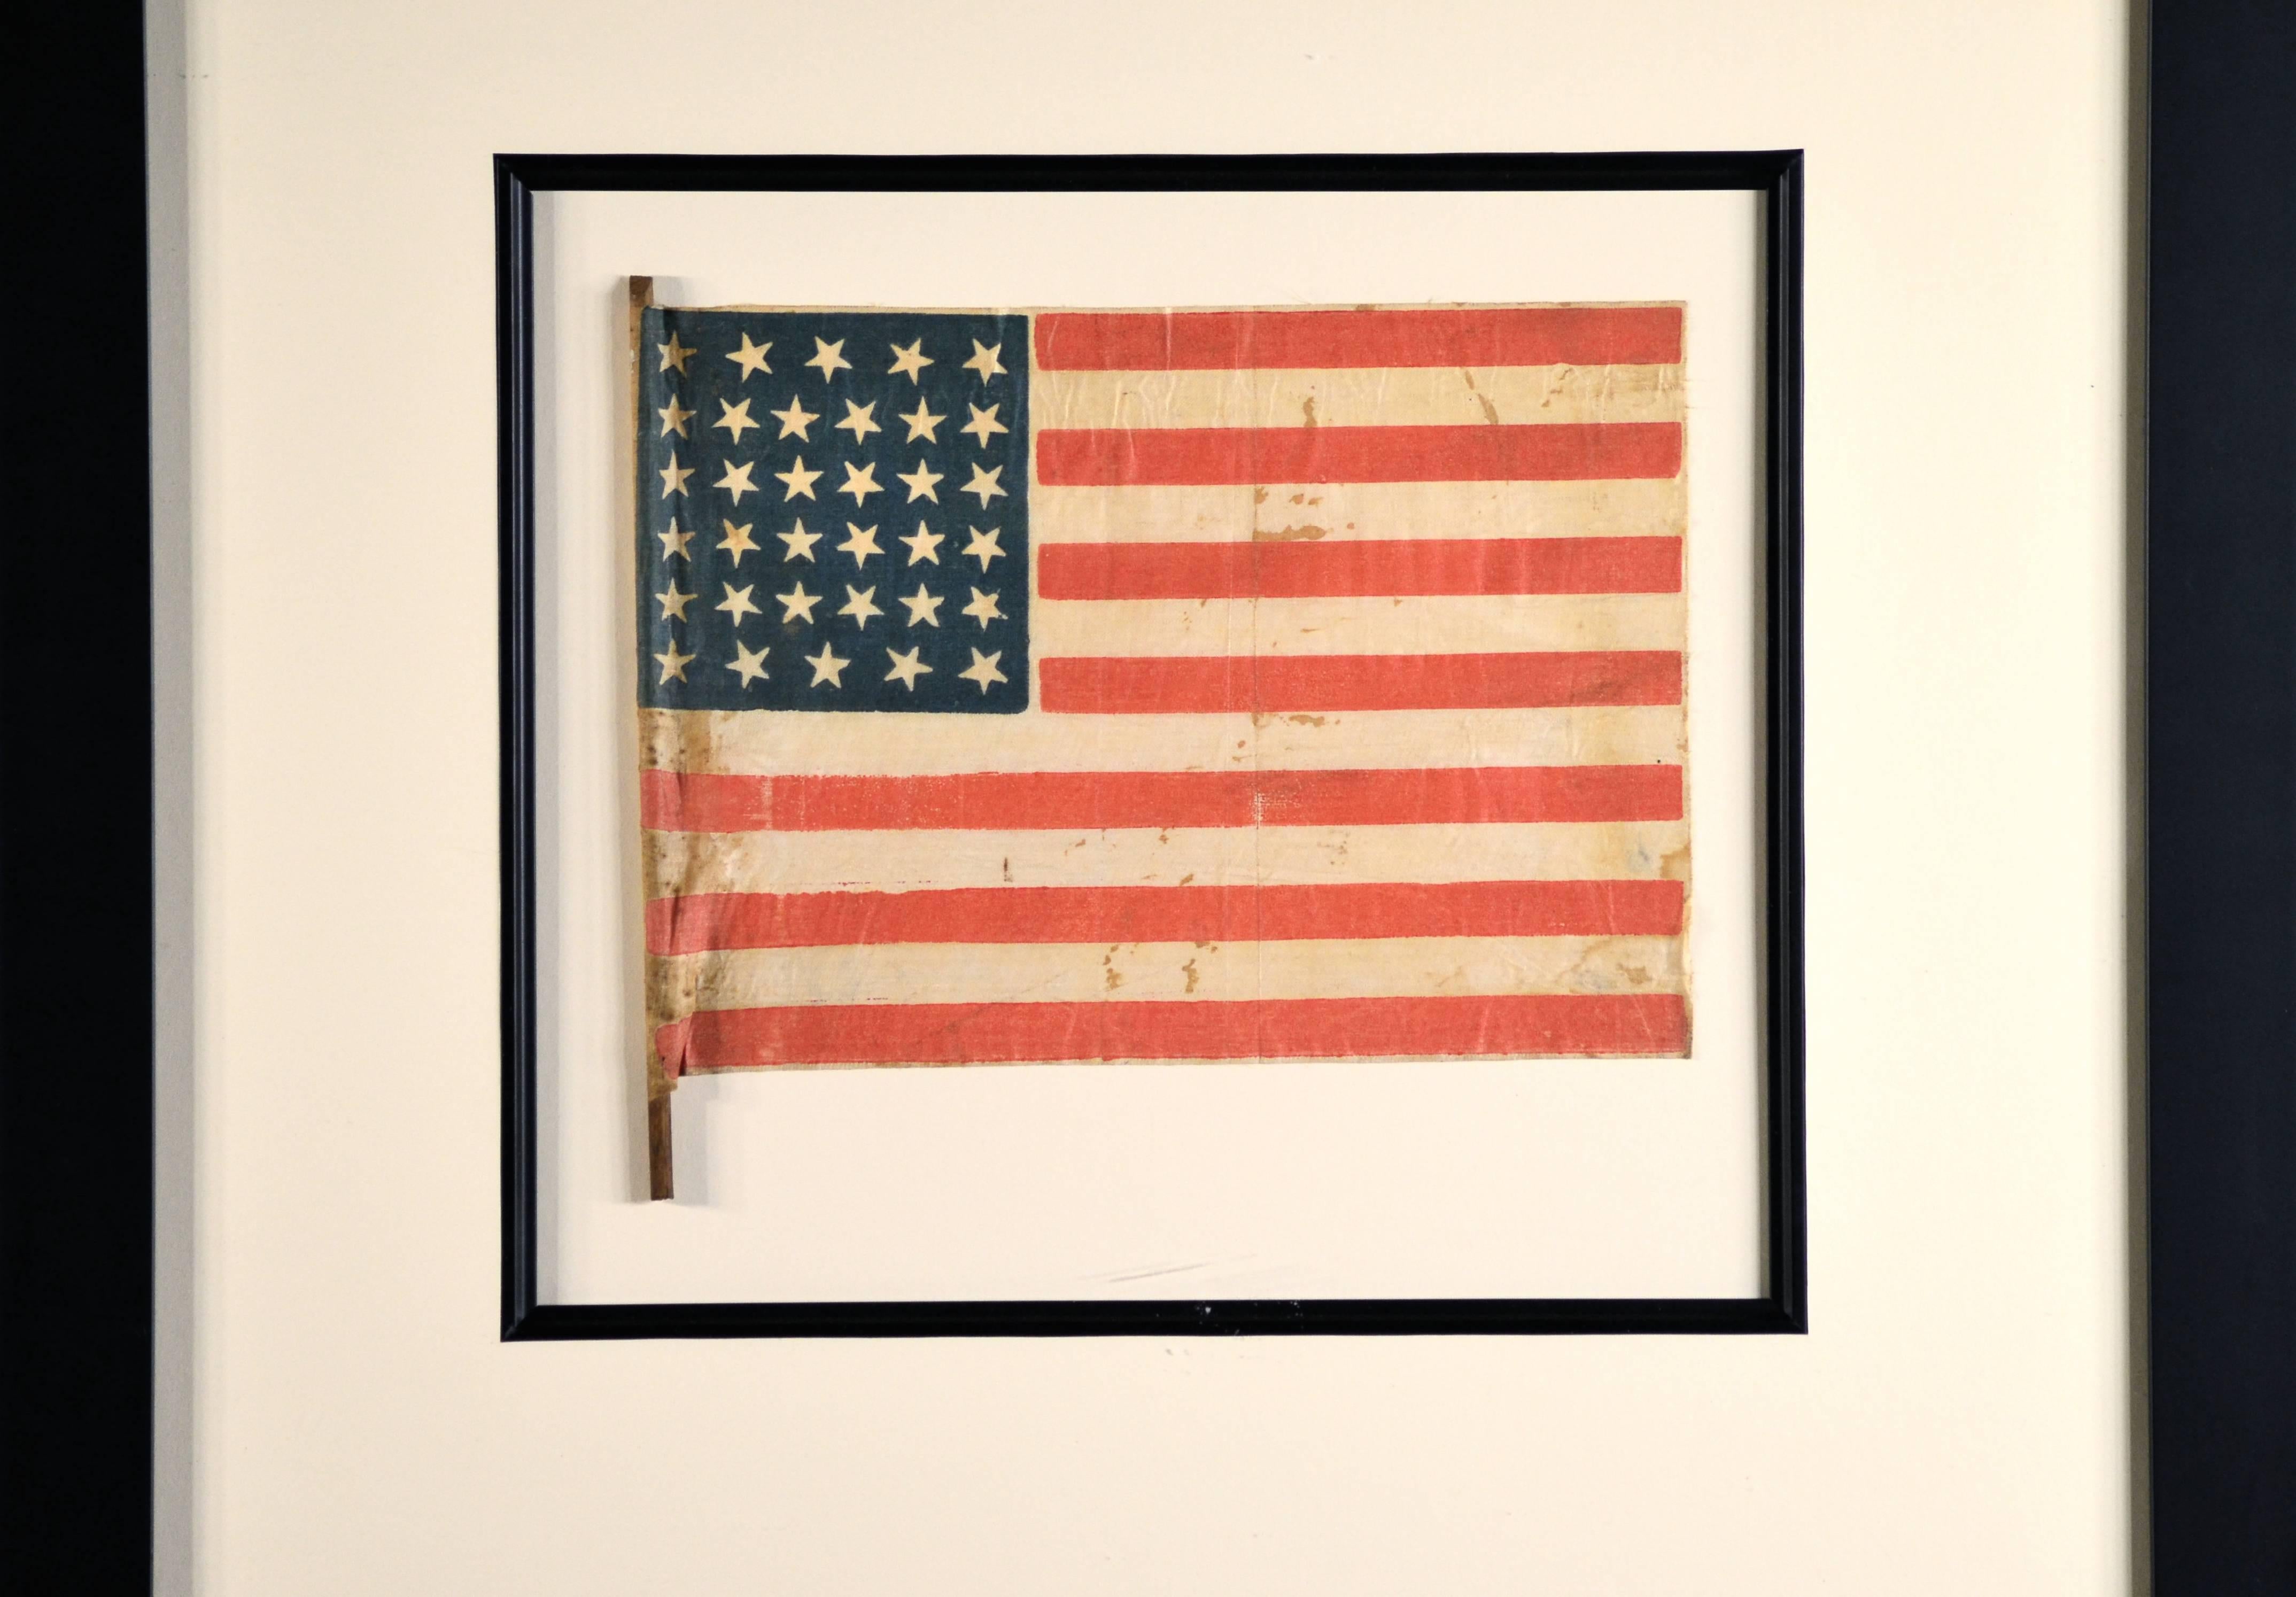 Authentic antique 34 star flag, civil war, circa 1861. Very rare star pattern: the first vertical row the stars is straight. The second and fourth vertical rows the stars curve in to the middle with two shorter vertical rows of stars in the centre.